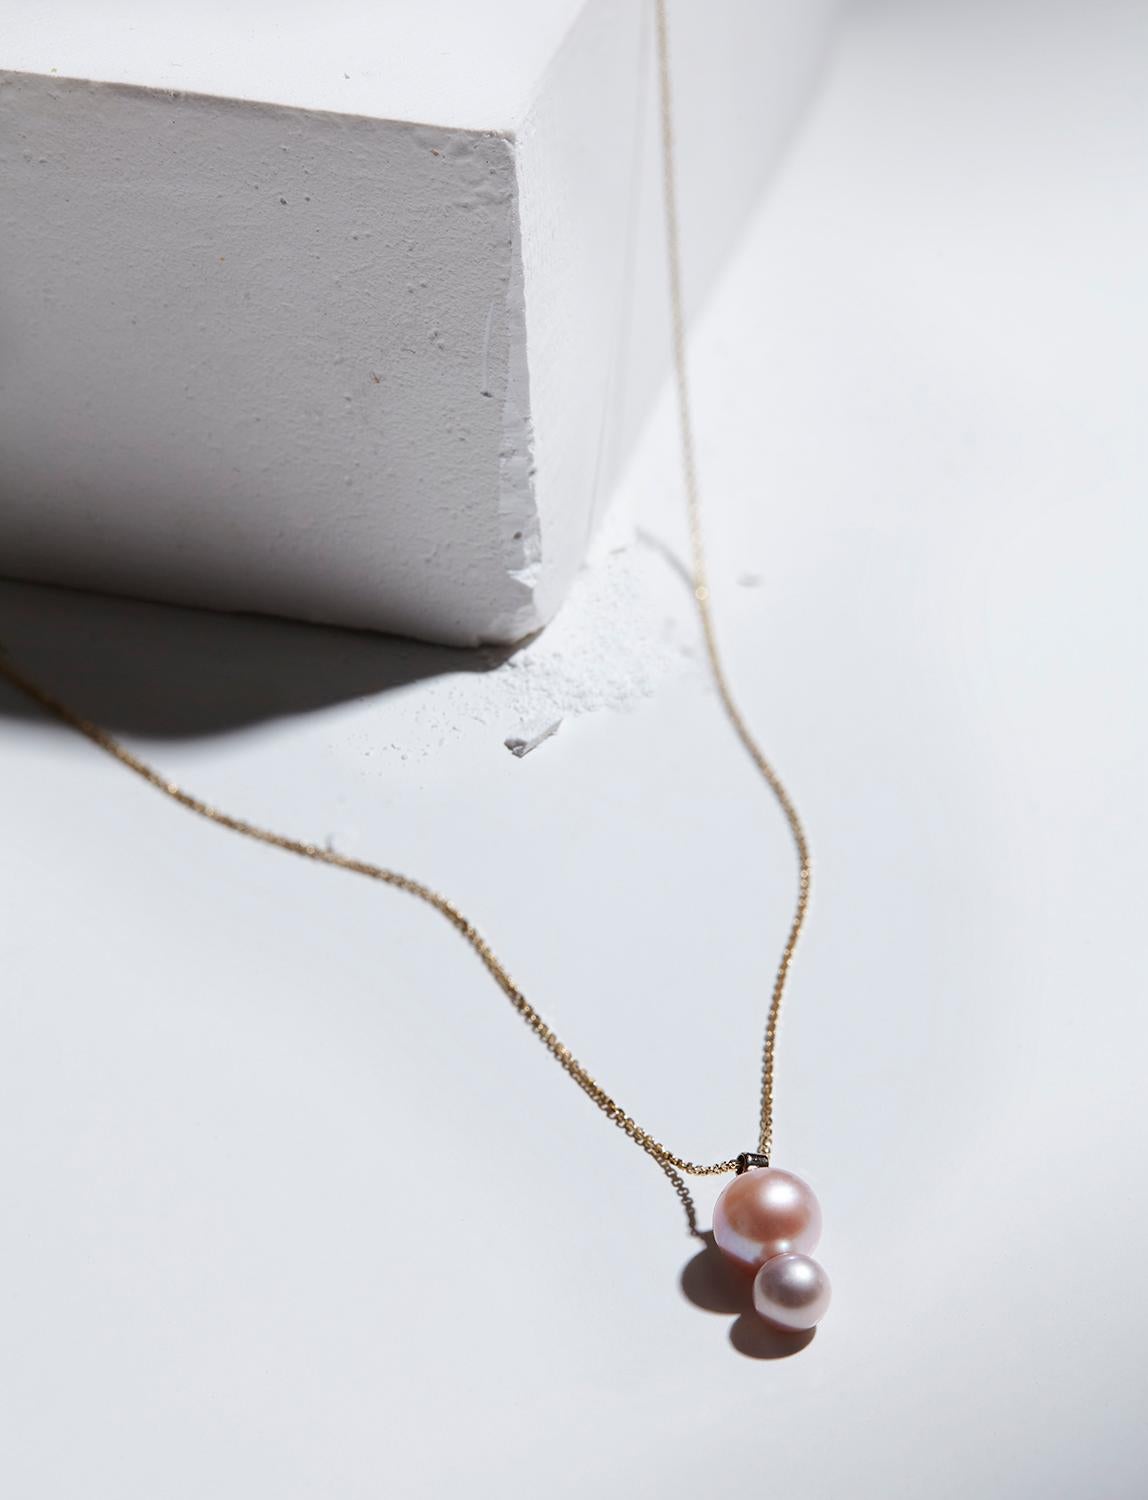 Elegant, feminine, unexpected.  This 14k yellow gold pearl necklace is a delicate twist on a classic pearl pendant necklace.  We love the way the luminescent rosy pearls sit together, their slightly different colors complementing each other and